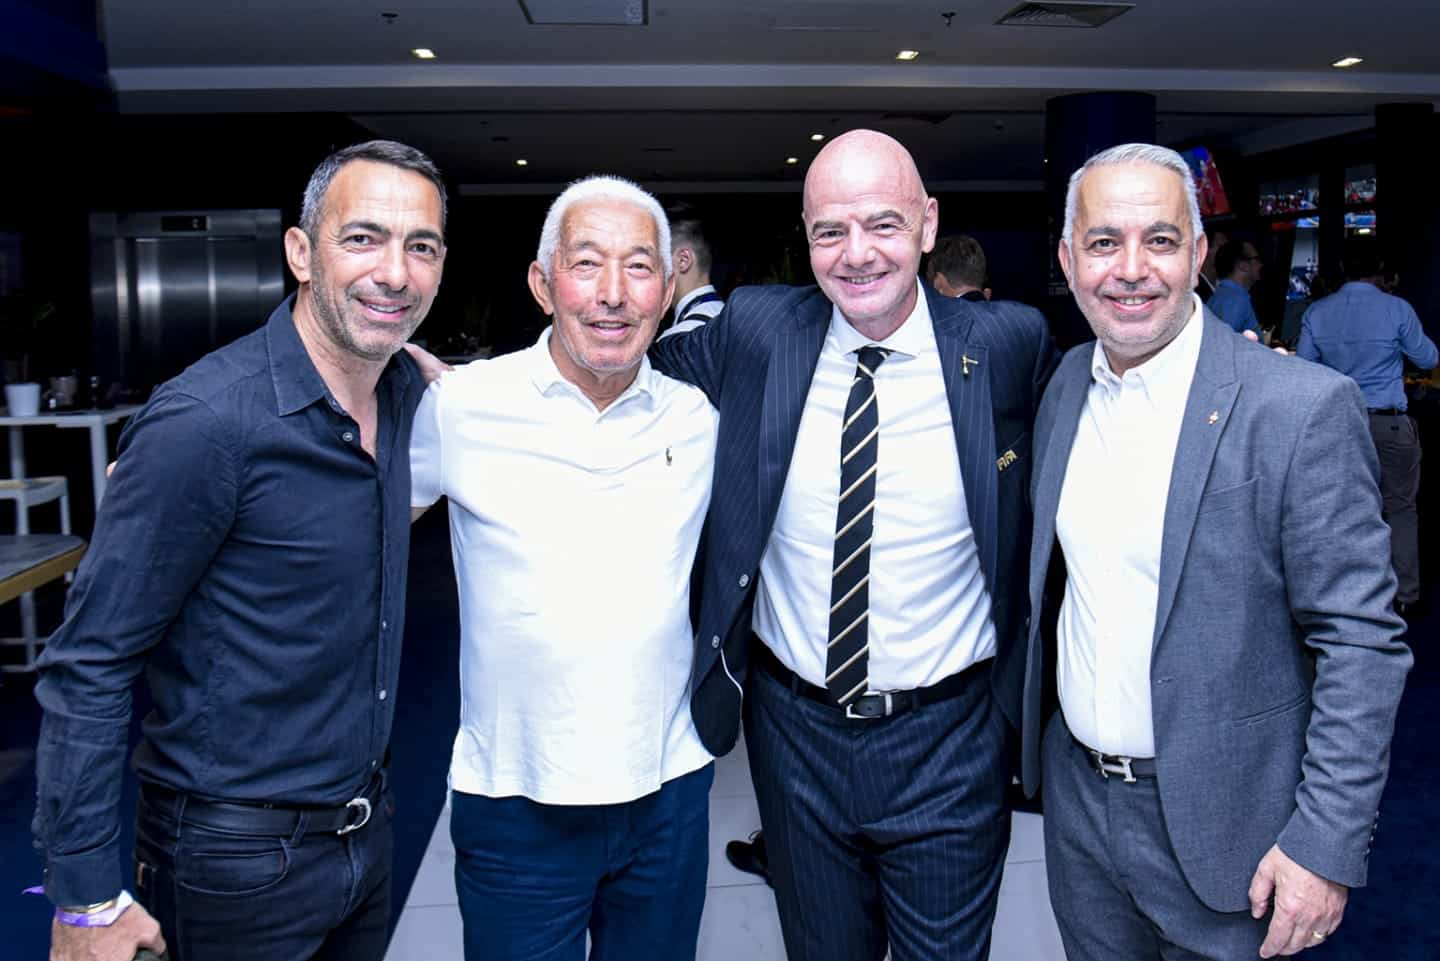 Yuri Djorkaeff Appointed CEO of the FIFA Foundation and FIFA Legends